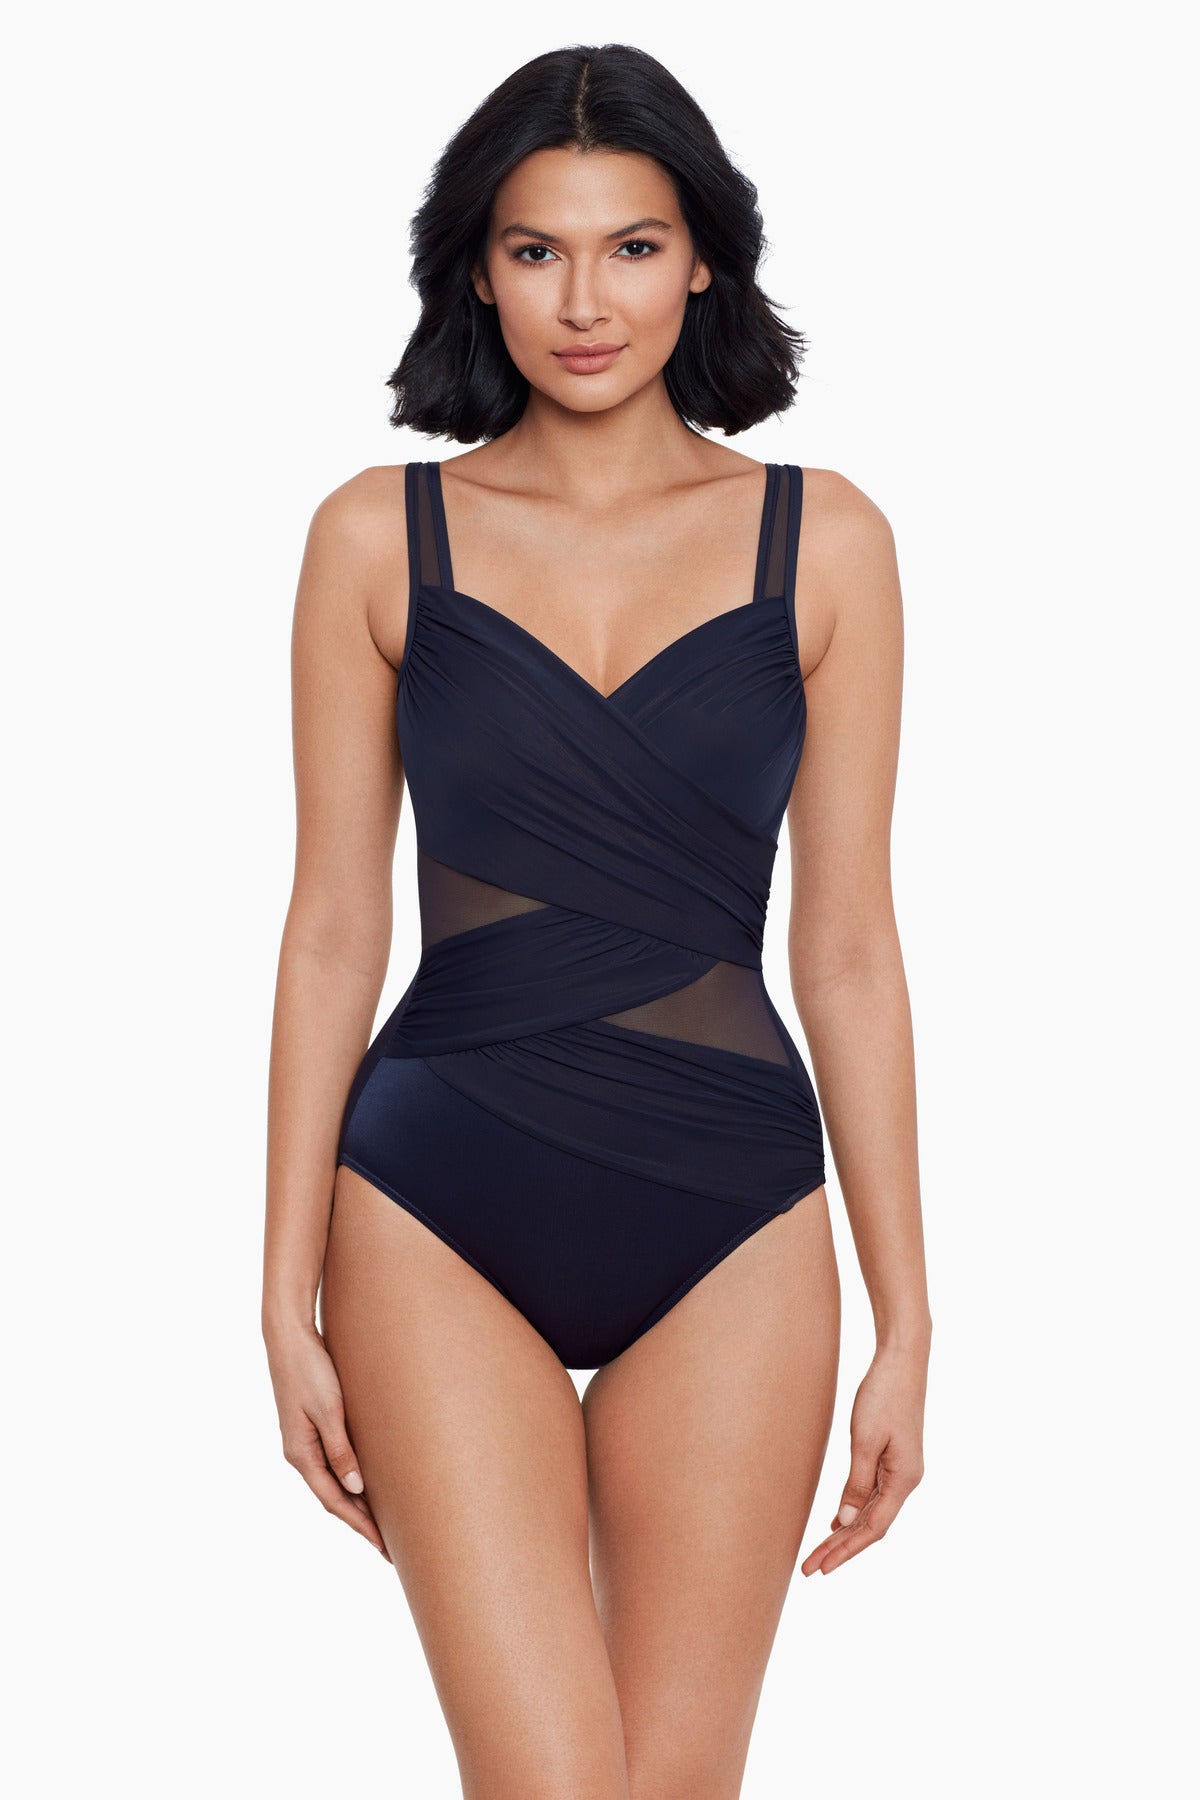 New Sensations Madero One Piece Swimsuit DD-Cup